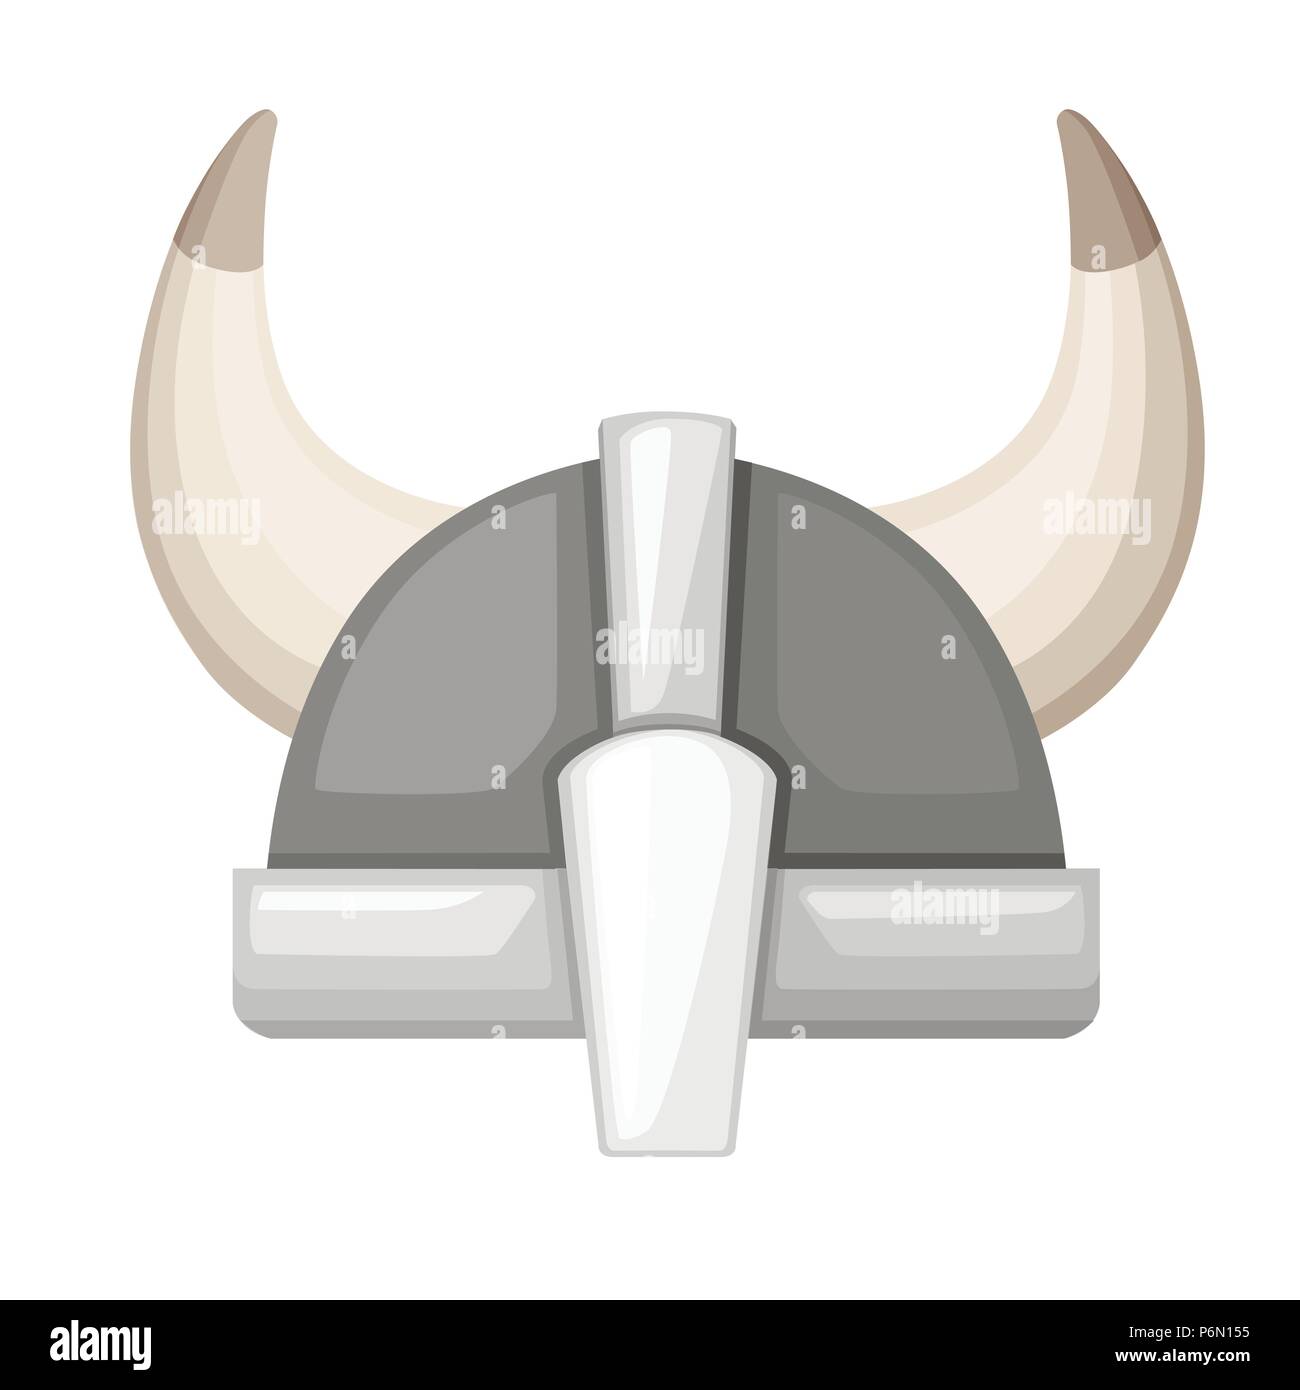 Viking helmet with horns. Scandinavian culture. Flat cartoon medieval equipment. Vector illustration isolated on white background. Stock Vector